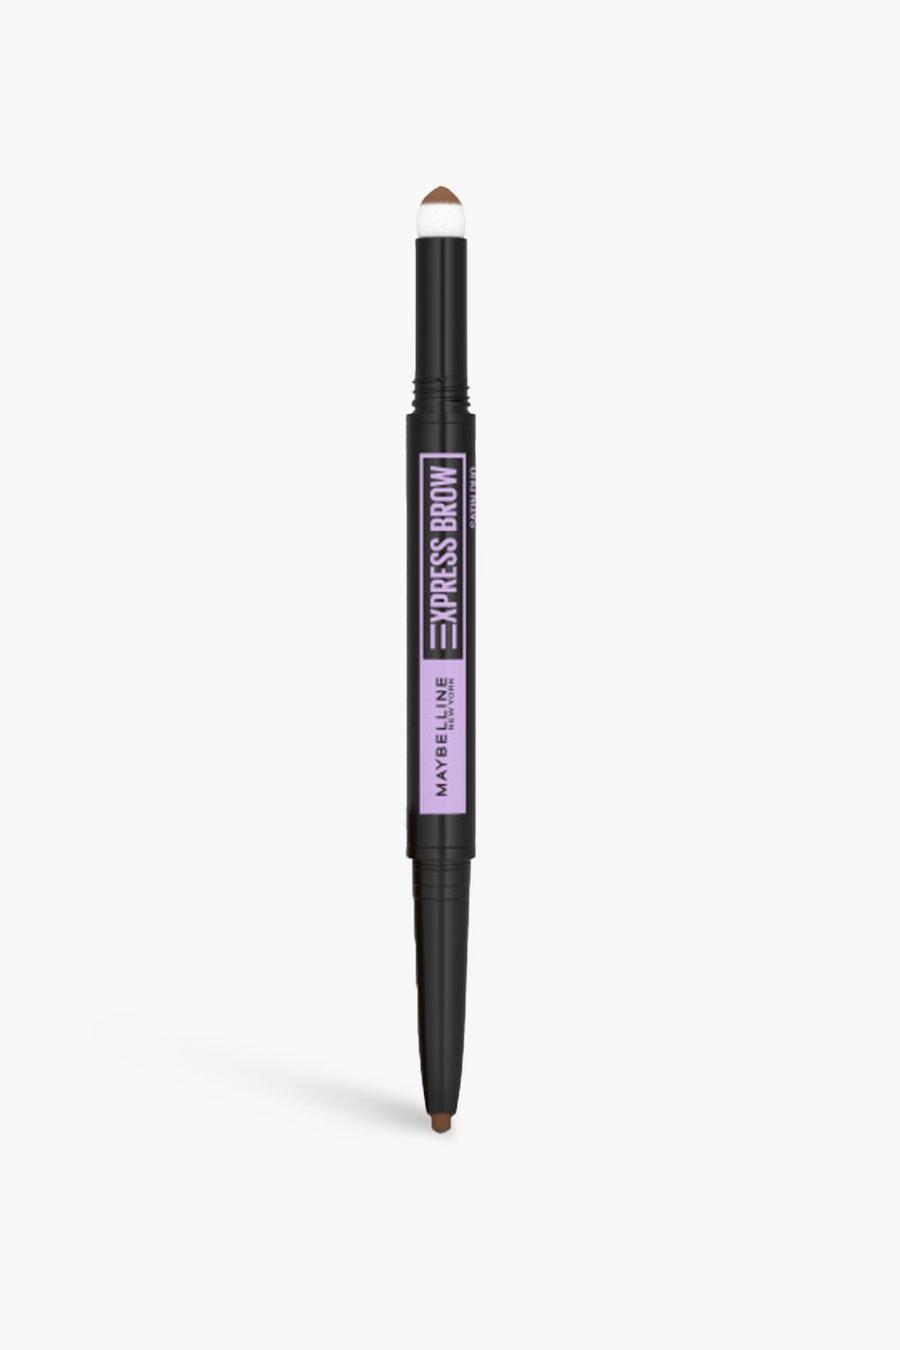 02 brunette Maybelline Express Brow Duo